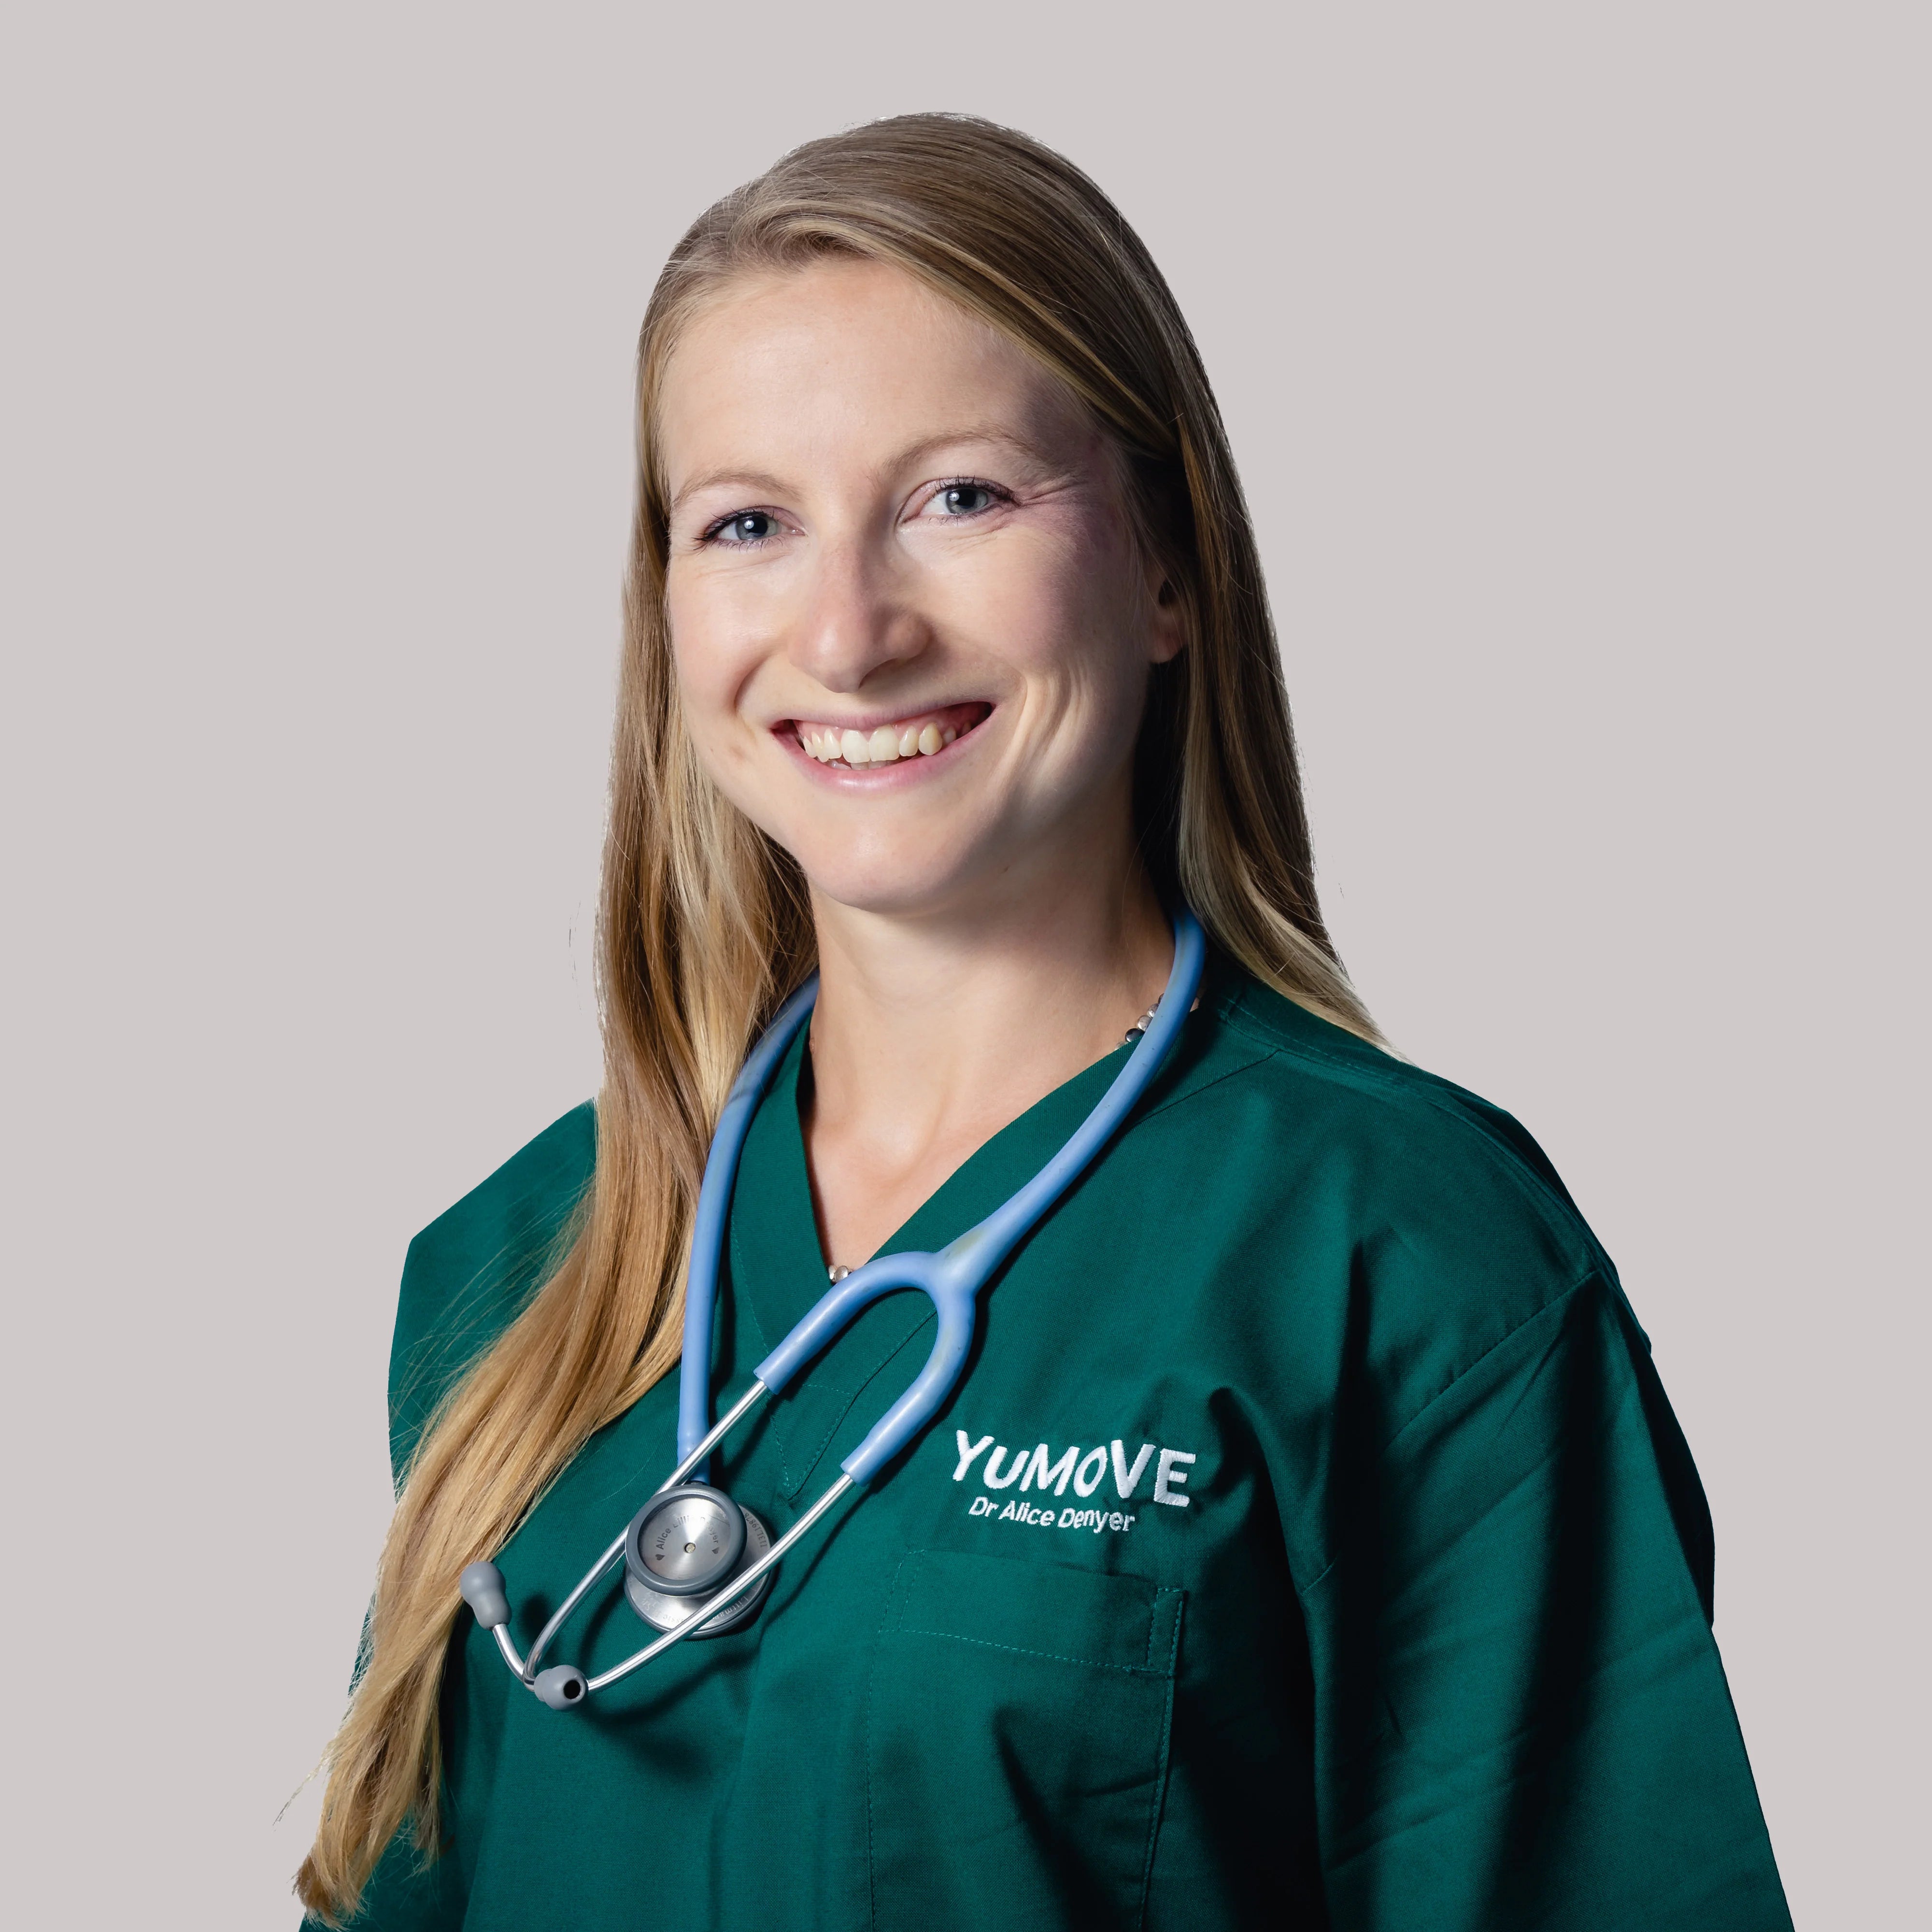 This image is of Dr. Alice Denyer, Veterinary Technical and Research Manager at YuMOVE, wearing green YuMOVE branded scrubs and a stethoscope in front of a plain white background.